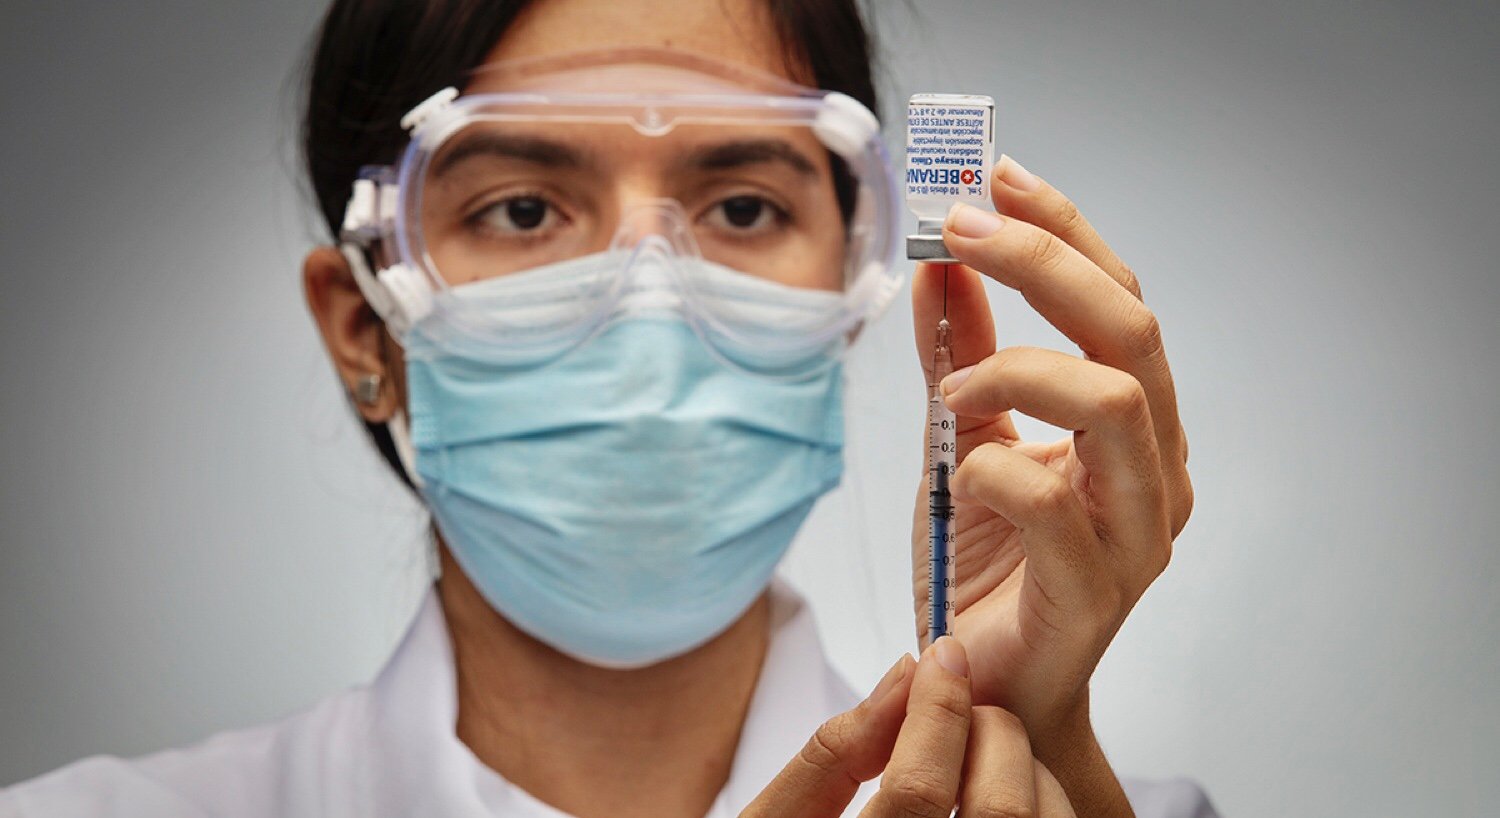 Health worker prepares the administration of a COVID-19 vaccine, Cuba, Jan. 19, 2022.